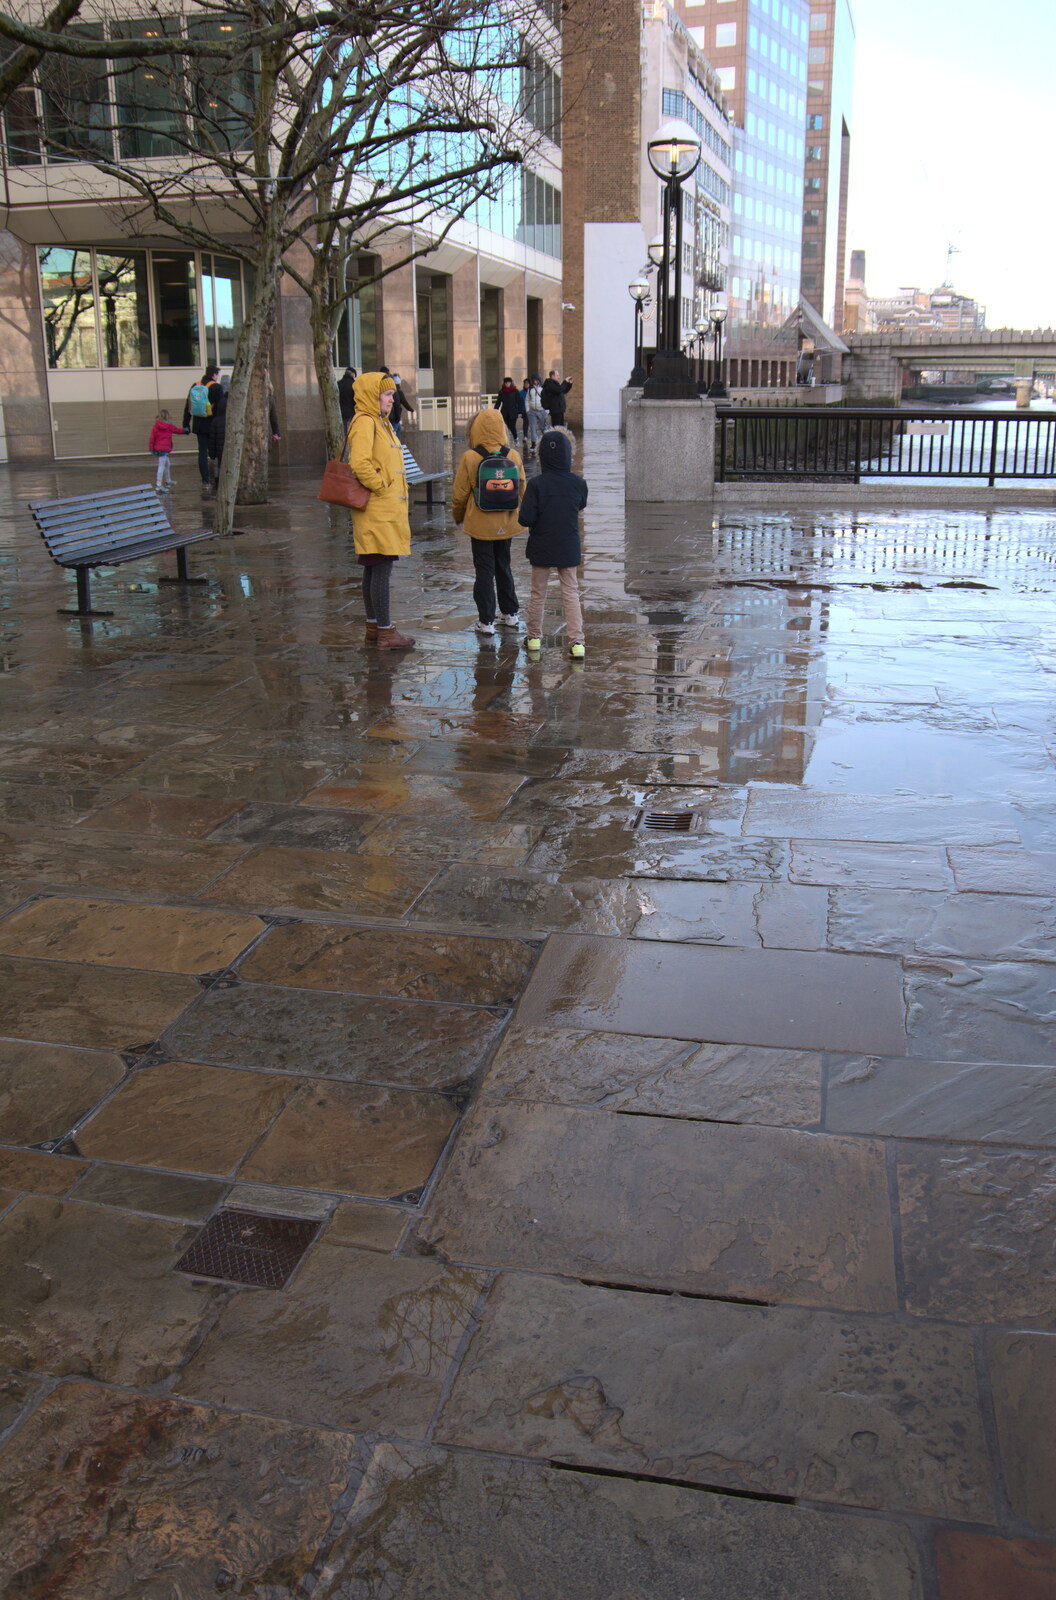 More wet flagstones from HMS Belfast and the South Bank, Southwark, London - 17th February 2020